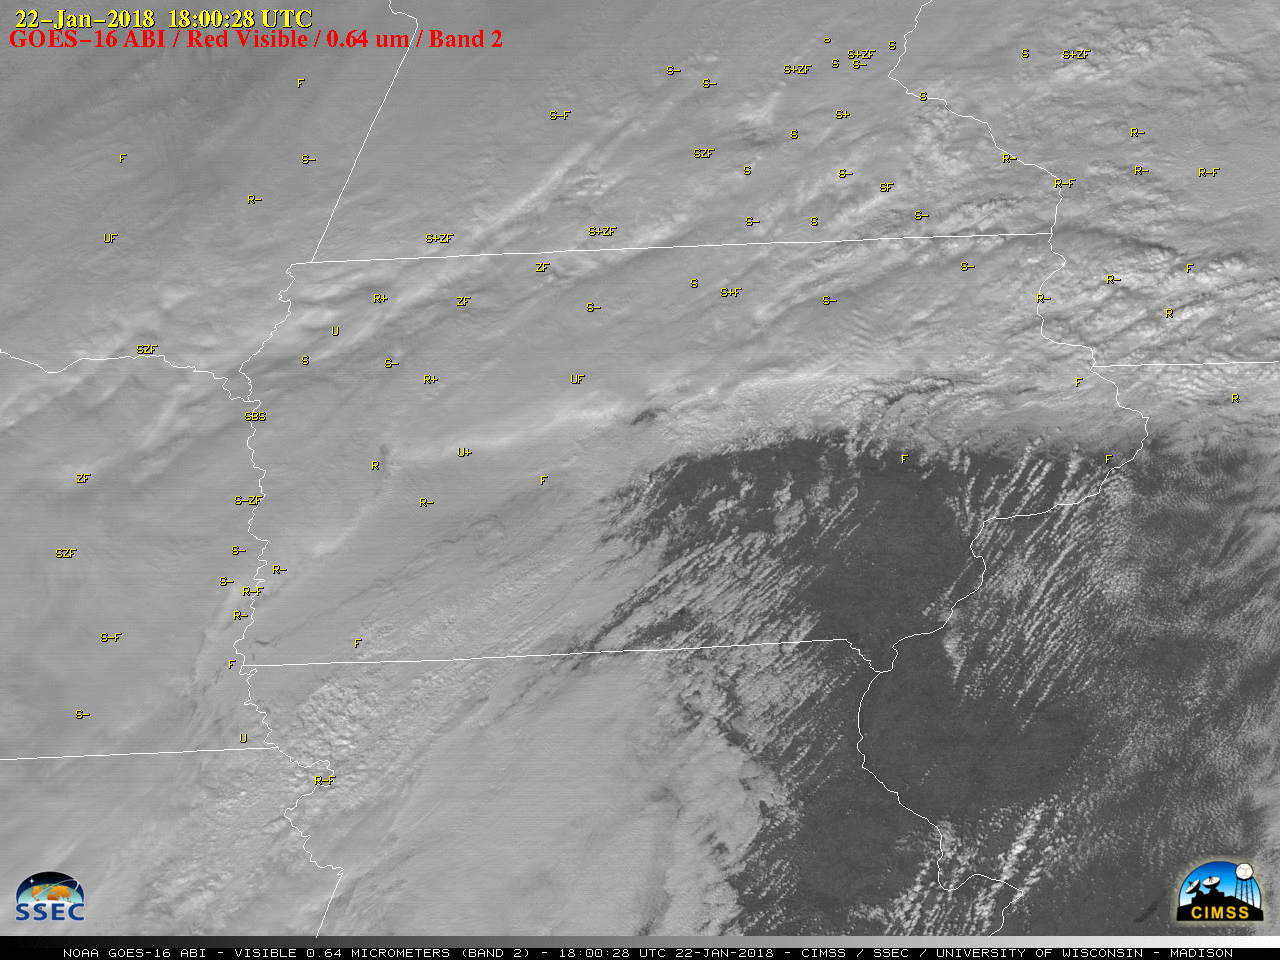 GOES-16 Visible (0.64 µm) images, with hourly precipitation type plotted in yellow [click to play MP4 animation]